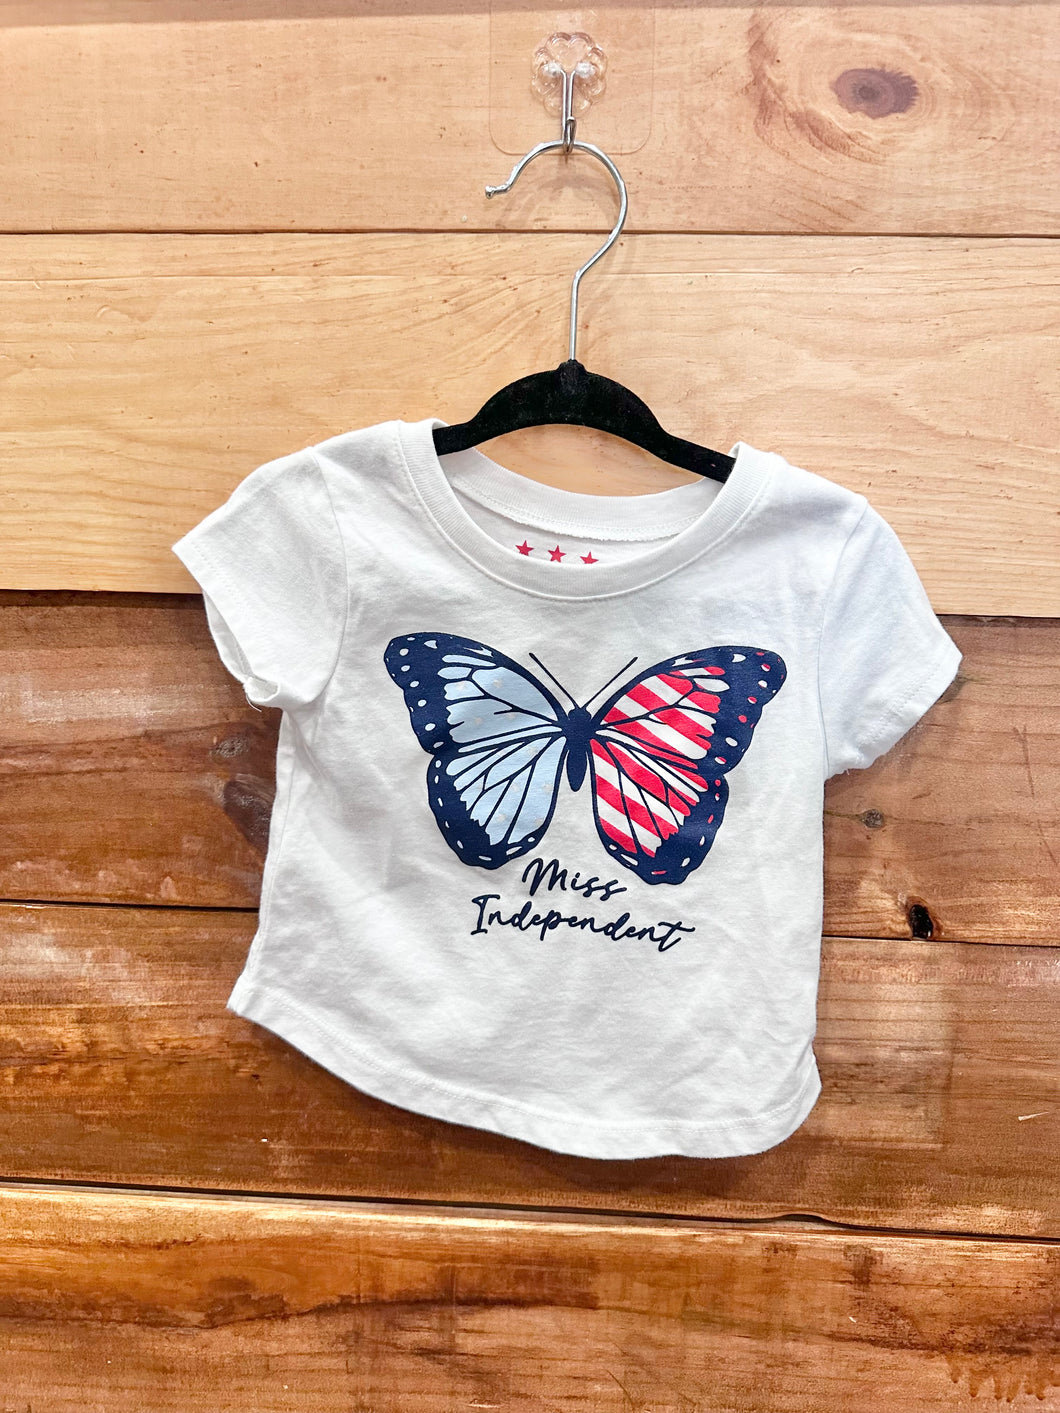 Miss Independent Butterfly Shirt Size 12m